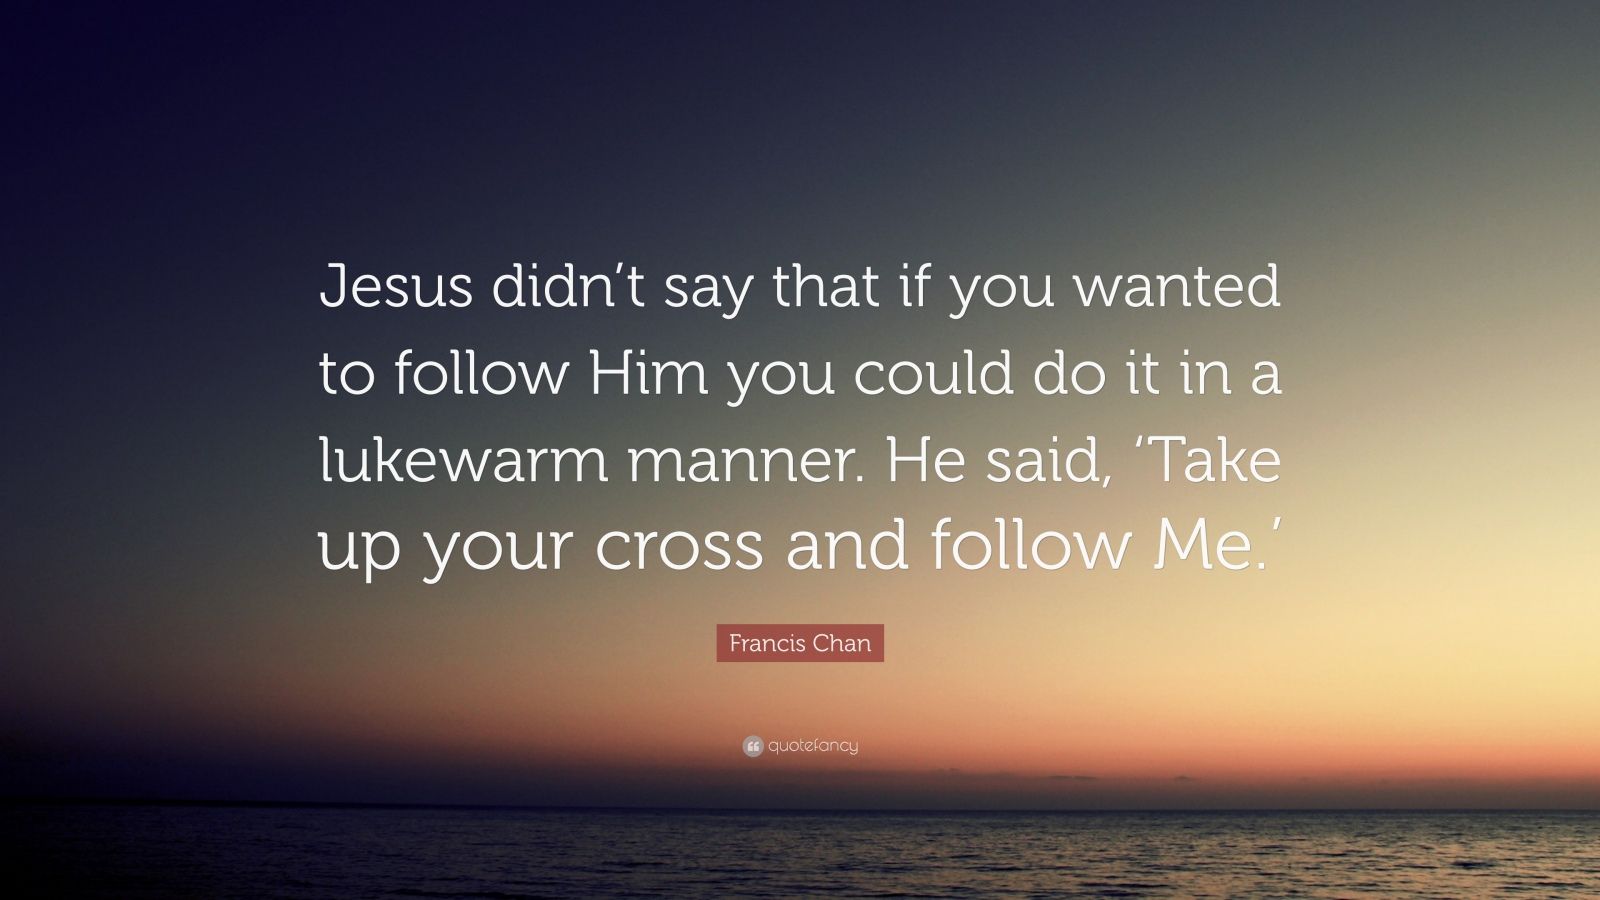 Francis Chan Quote: “Jesus didn’t say that if you wanted to follow Him ...